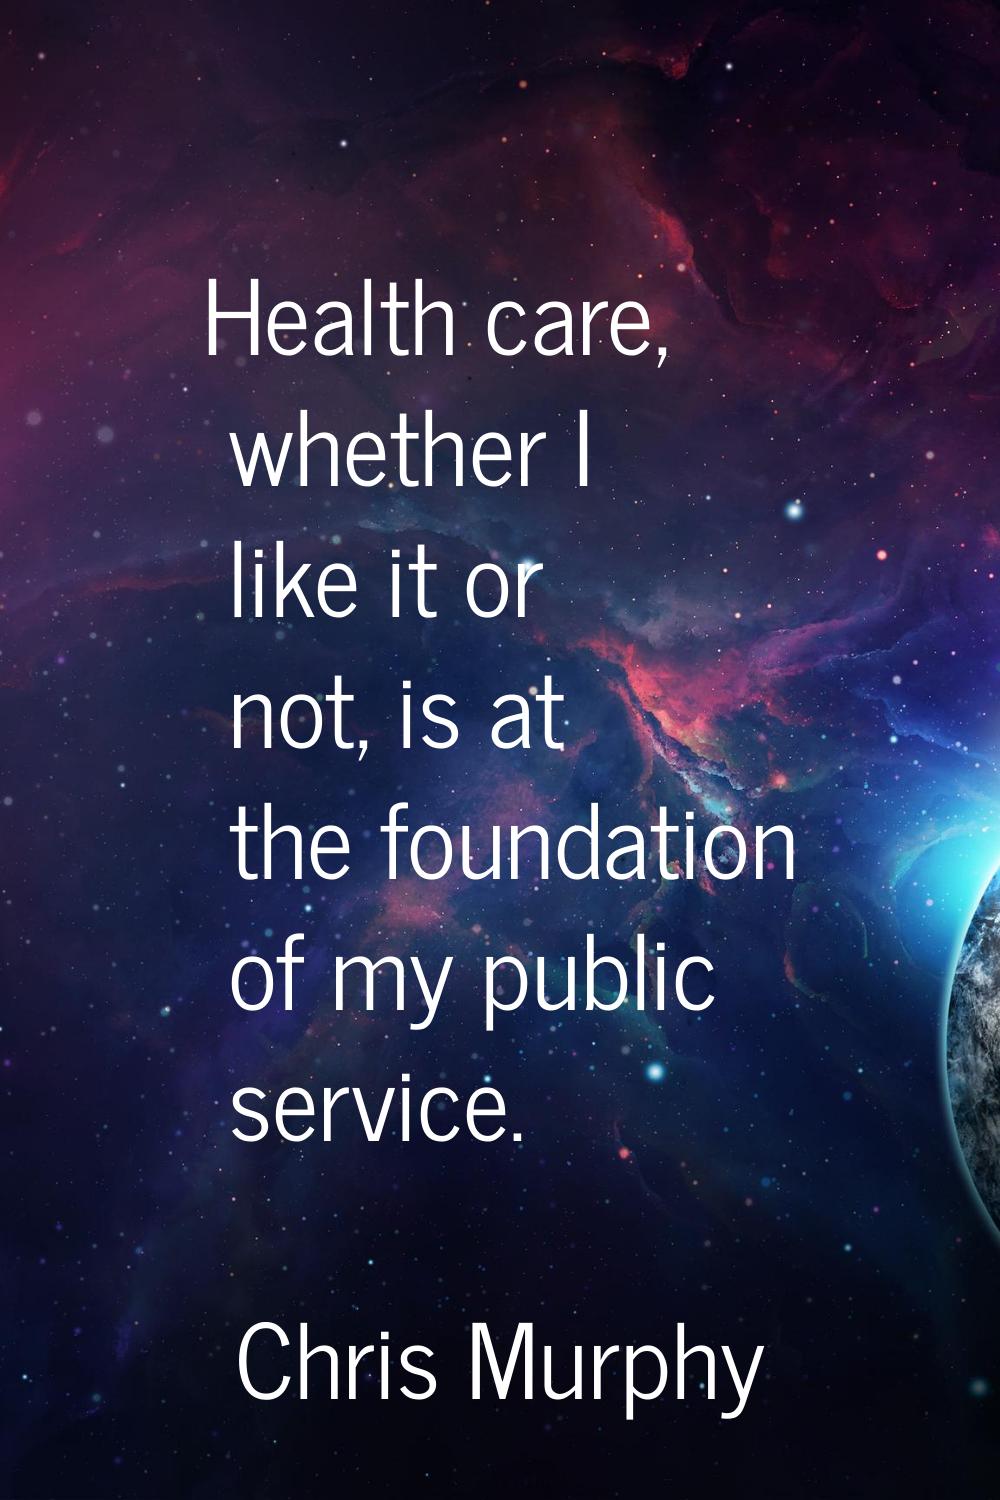 Health care, whether I like it or not, is at the foundation of my public service.